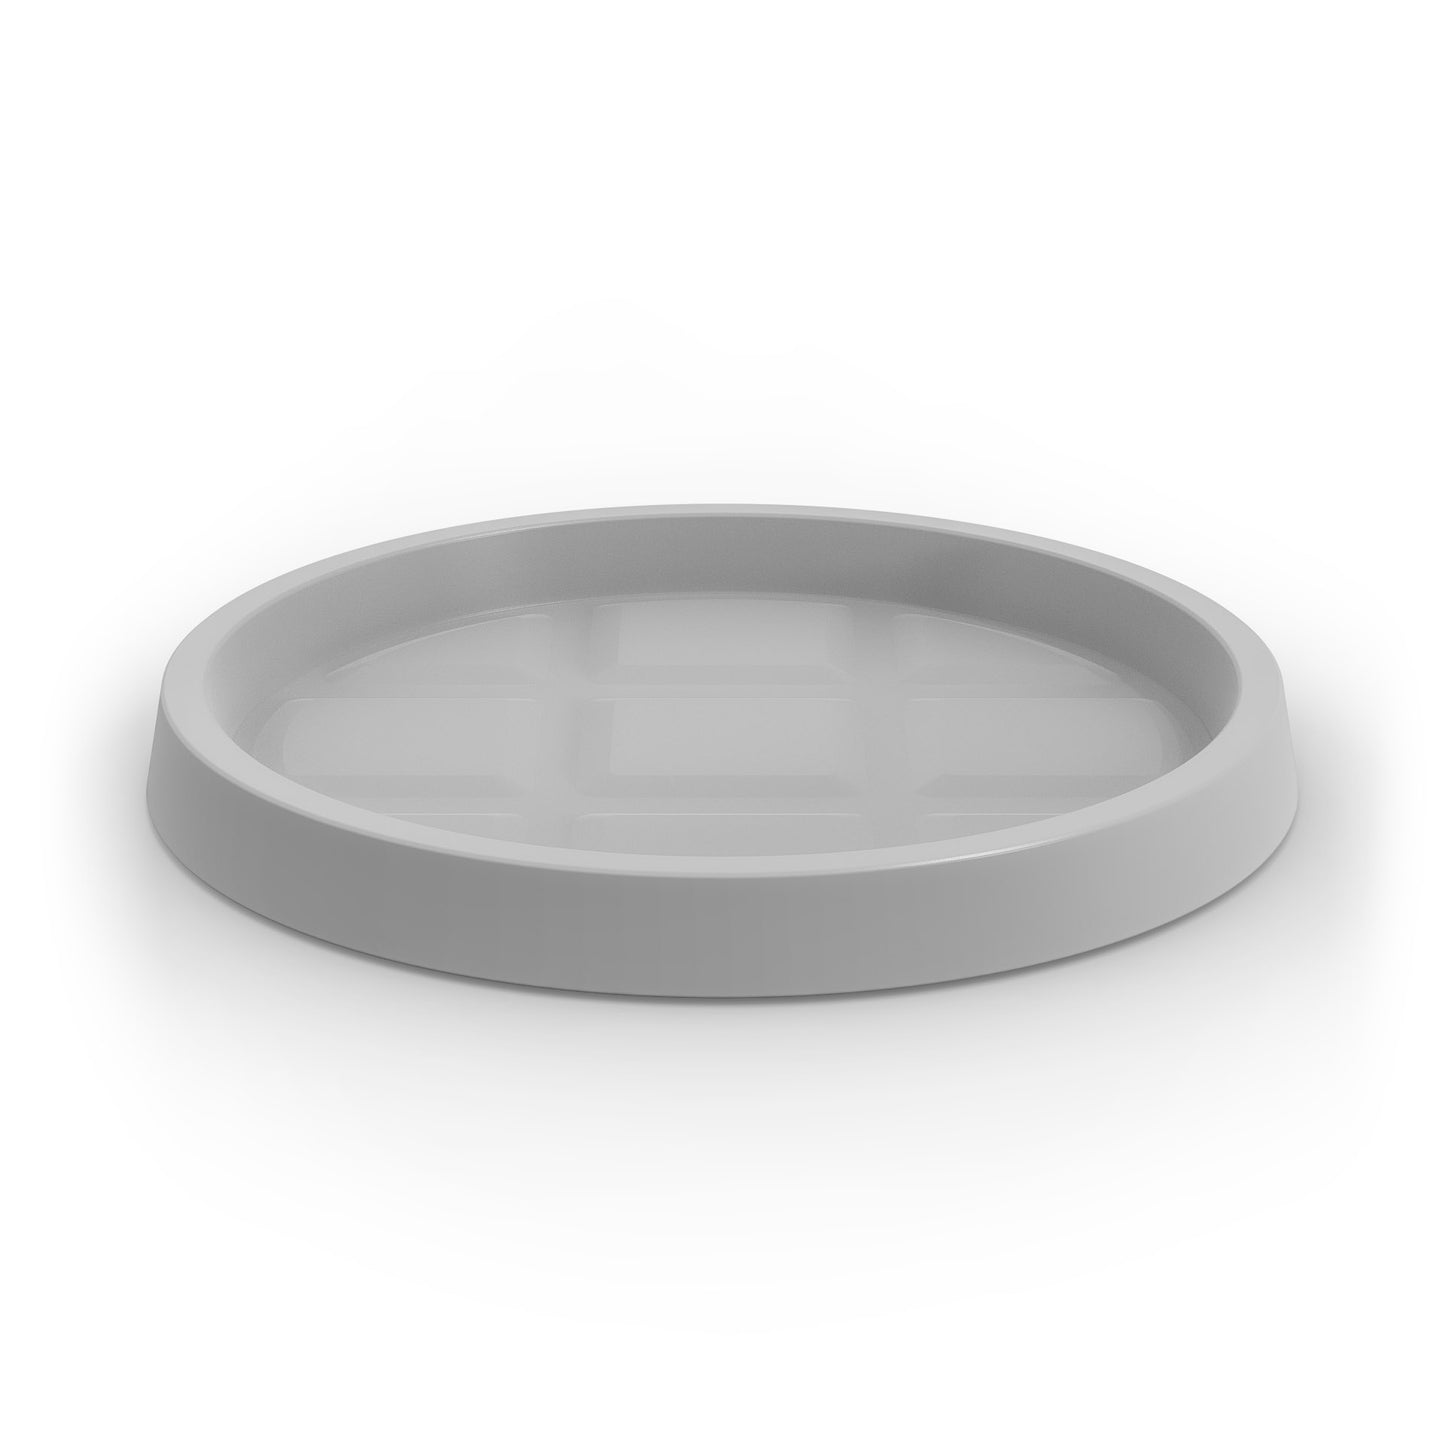 A light grey saucer for Modscene planters. New Zealand made.